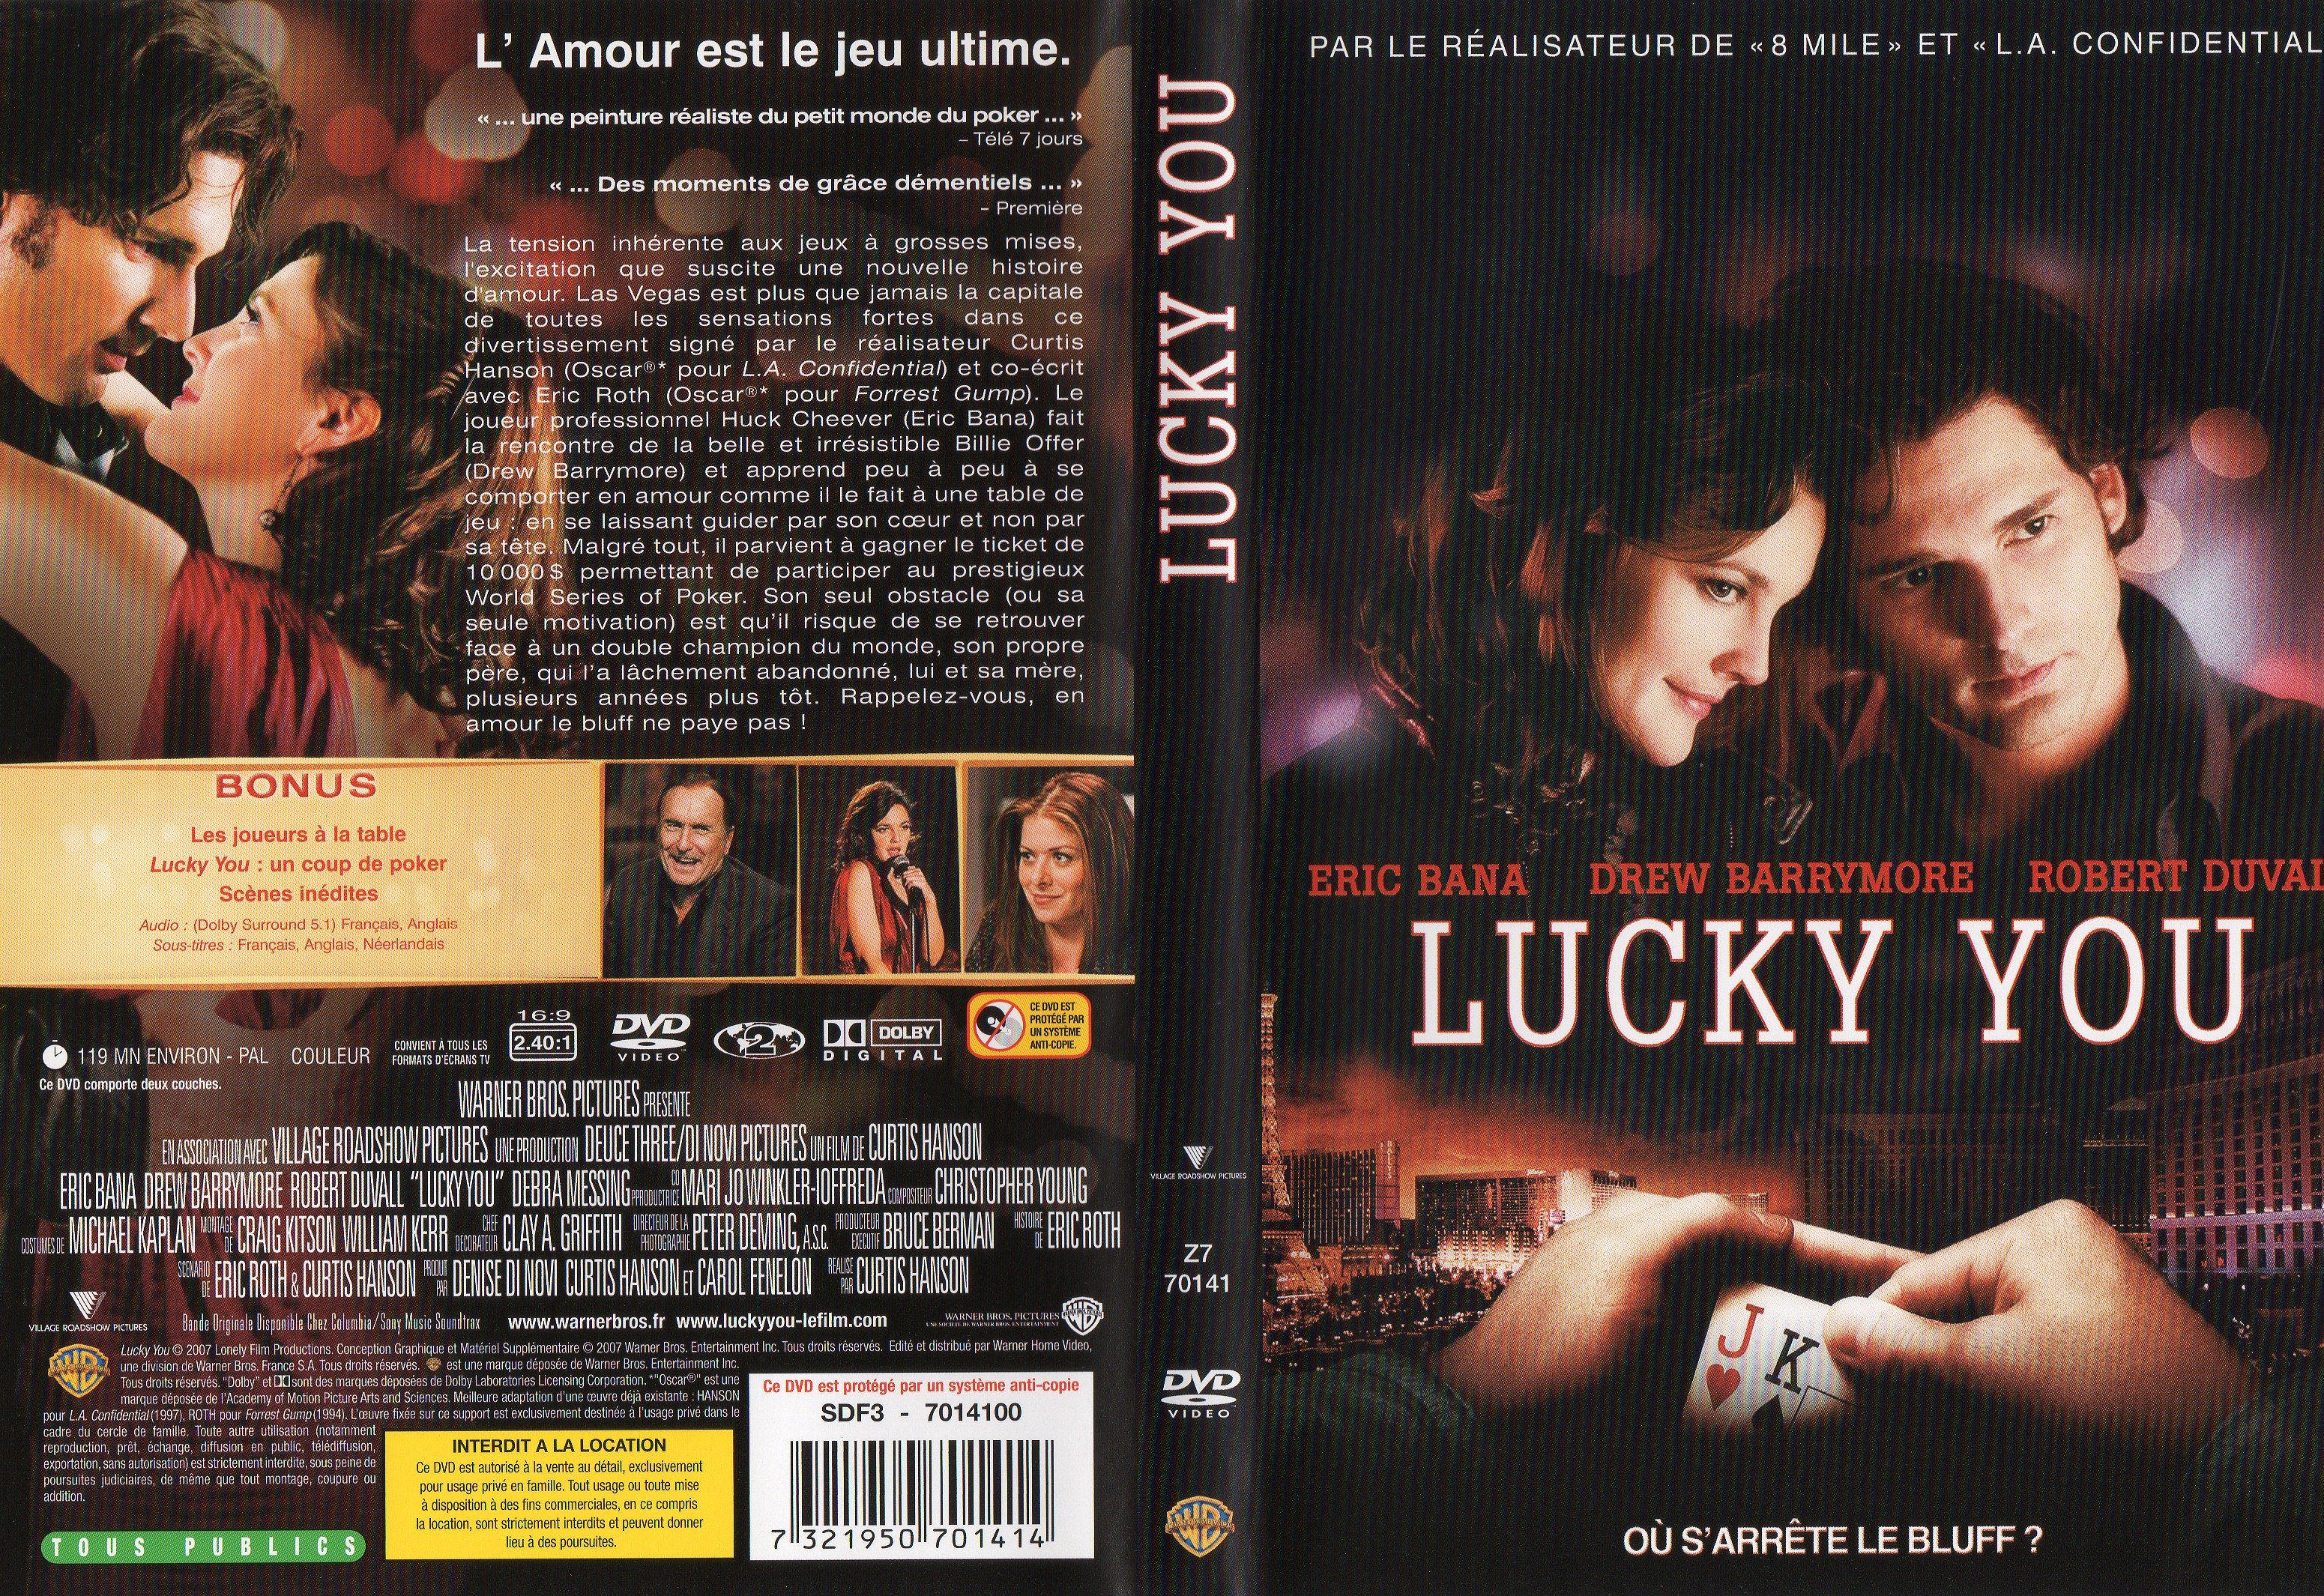 Jaquette DVD Lucky You v2